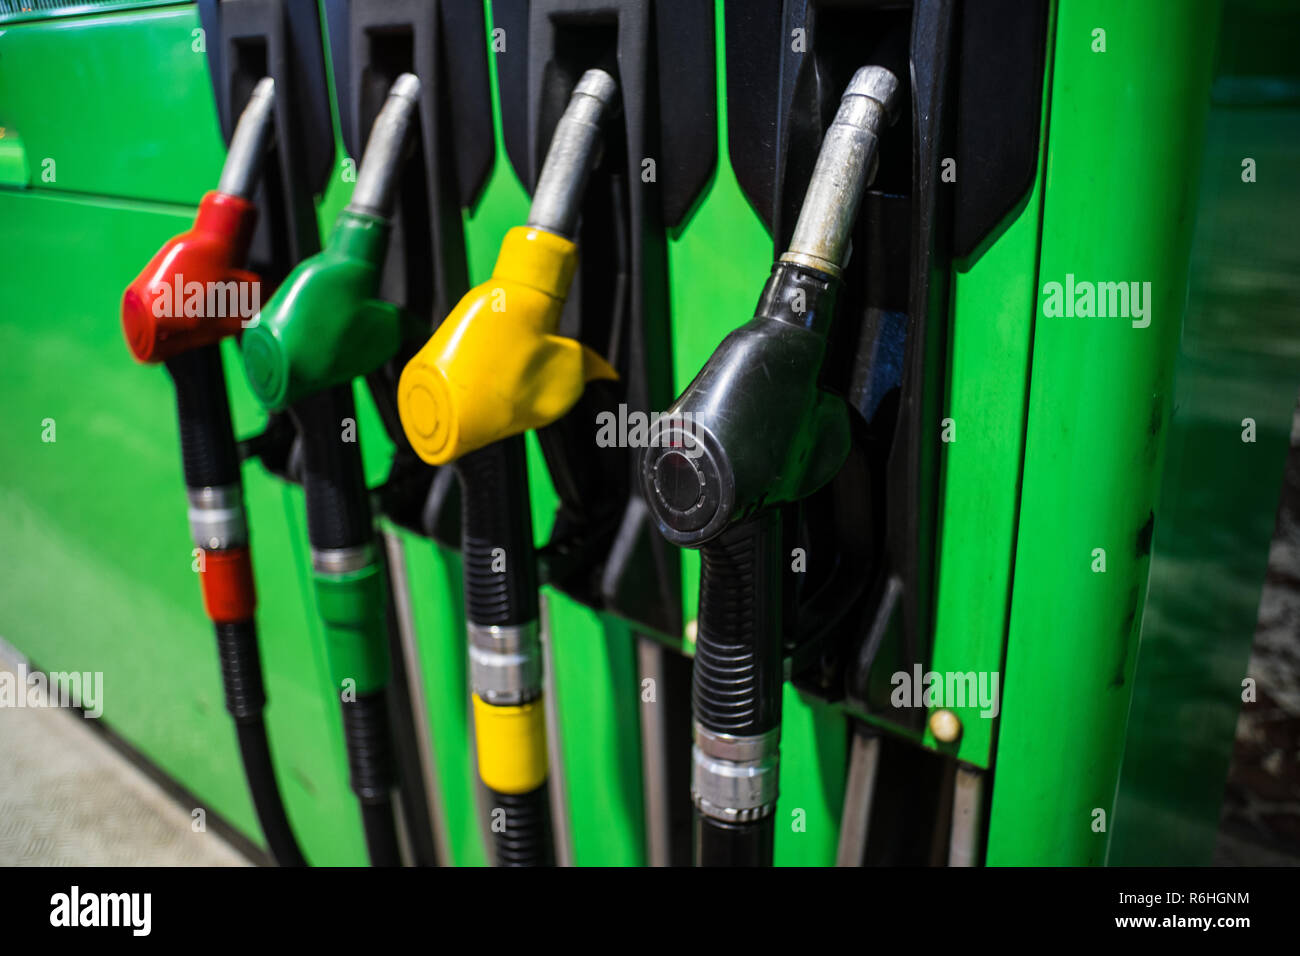 Fueling nozzles in different colors on green bright station Stock Photo